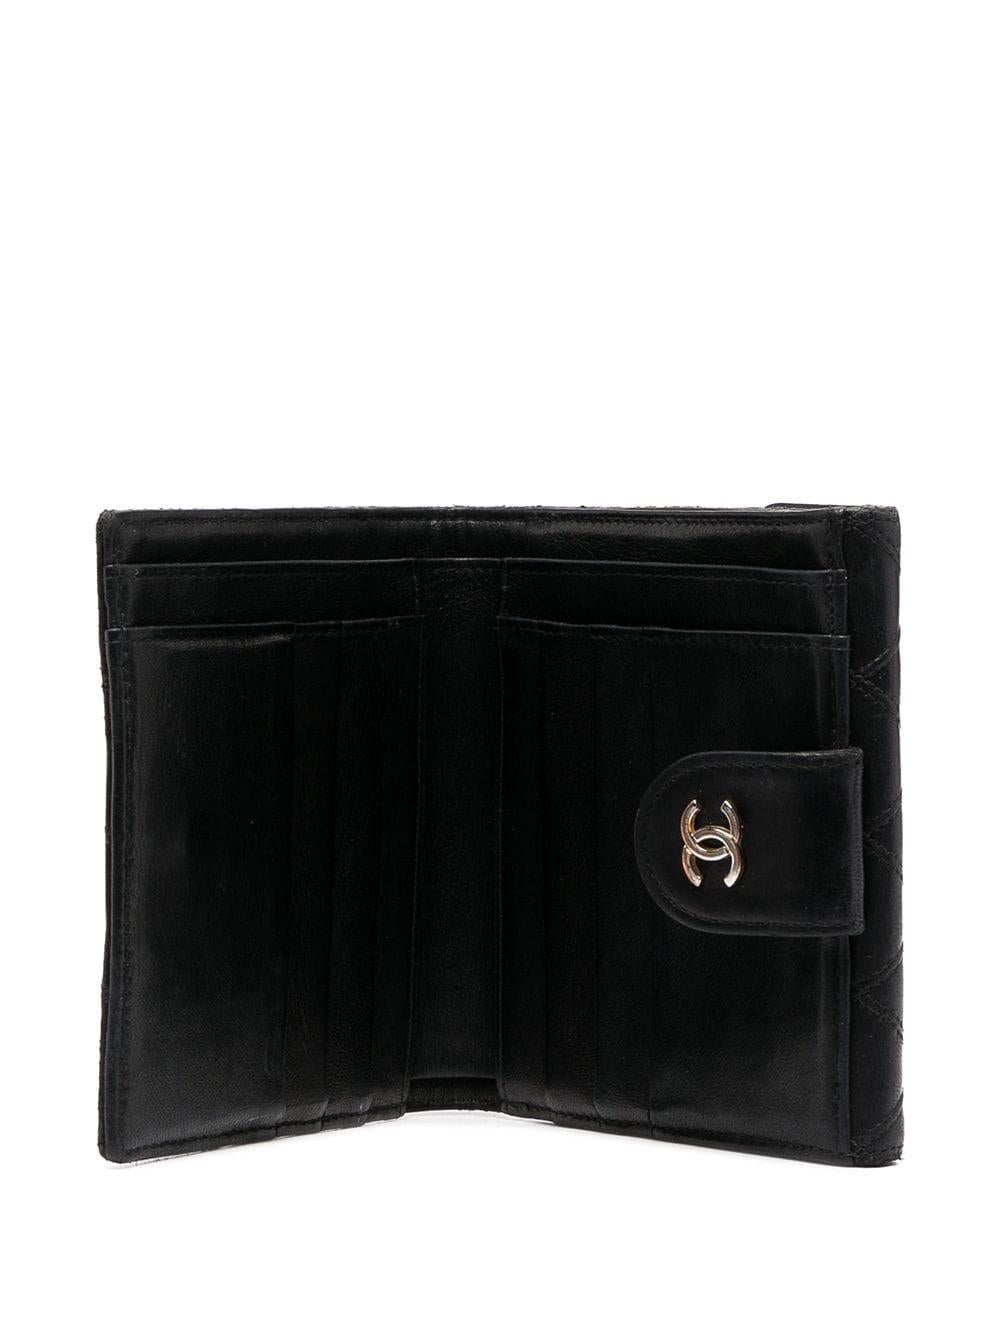 Chanel black quilted lamb wallet featuring signature interlocking CC logo,  multiple internal slip pockets, internal card slots, front flap pocket, leather lining.
Length 3.9in (10cm)
Width 4.3in. (11cm)
Depth 0.8in. (2cm) 
In good vintage